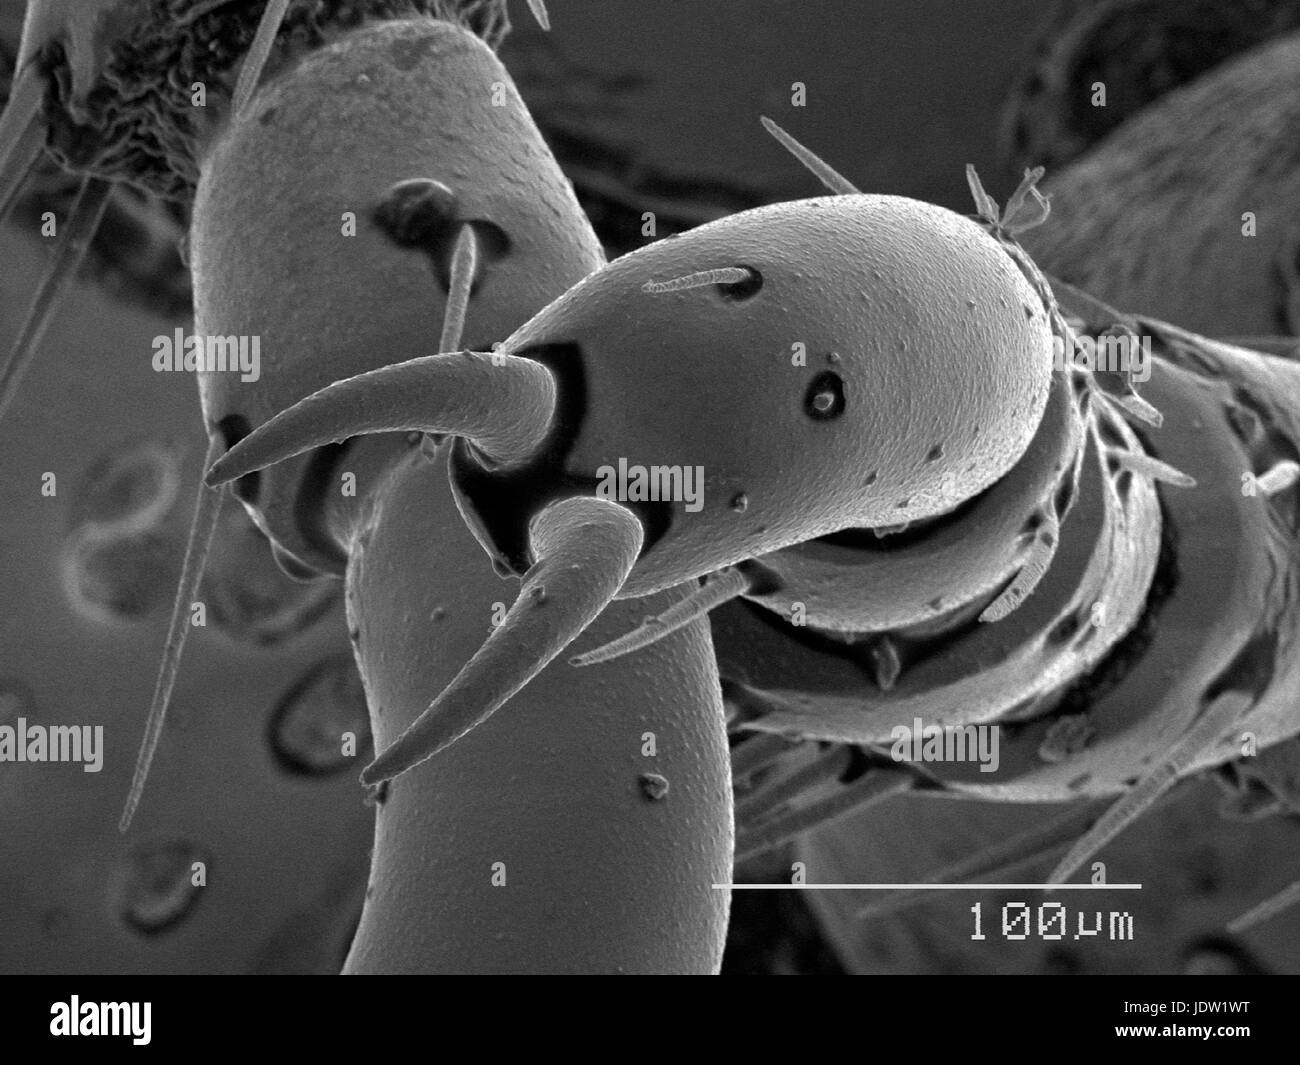 Magnified view of claws of beetle Stock Photo